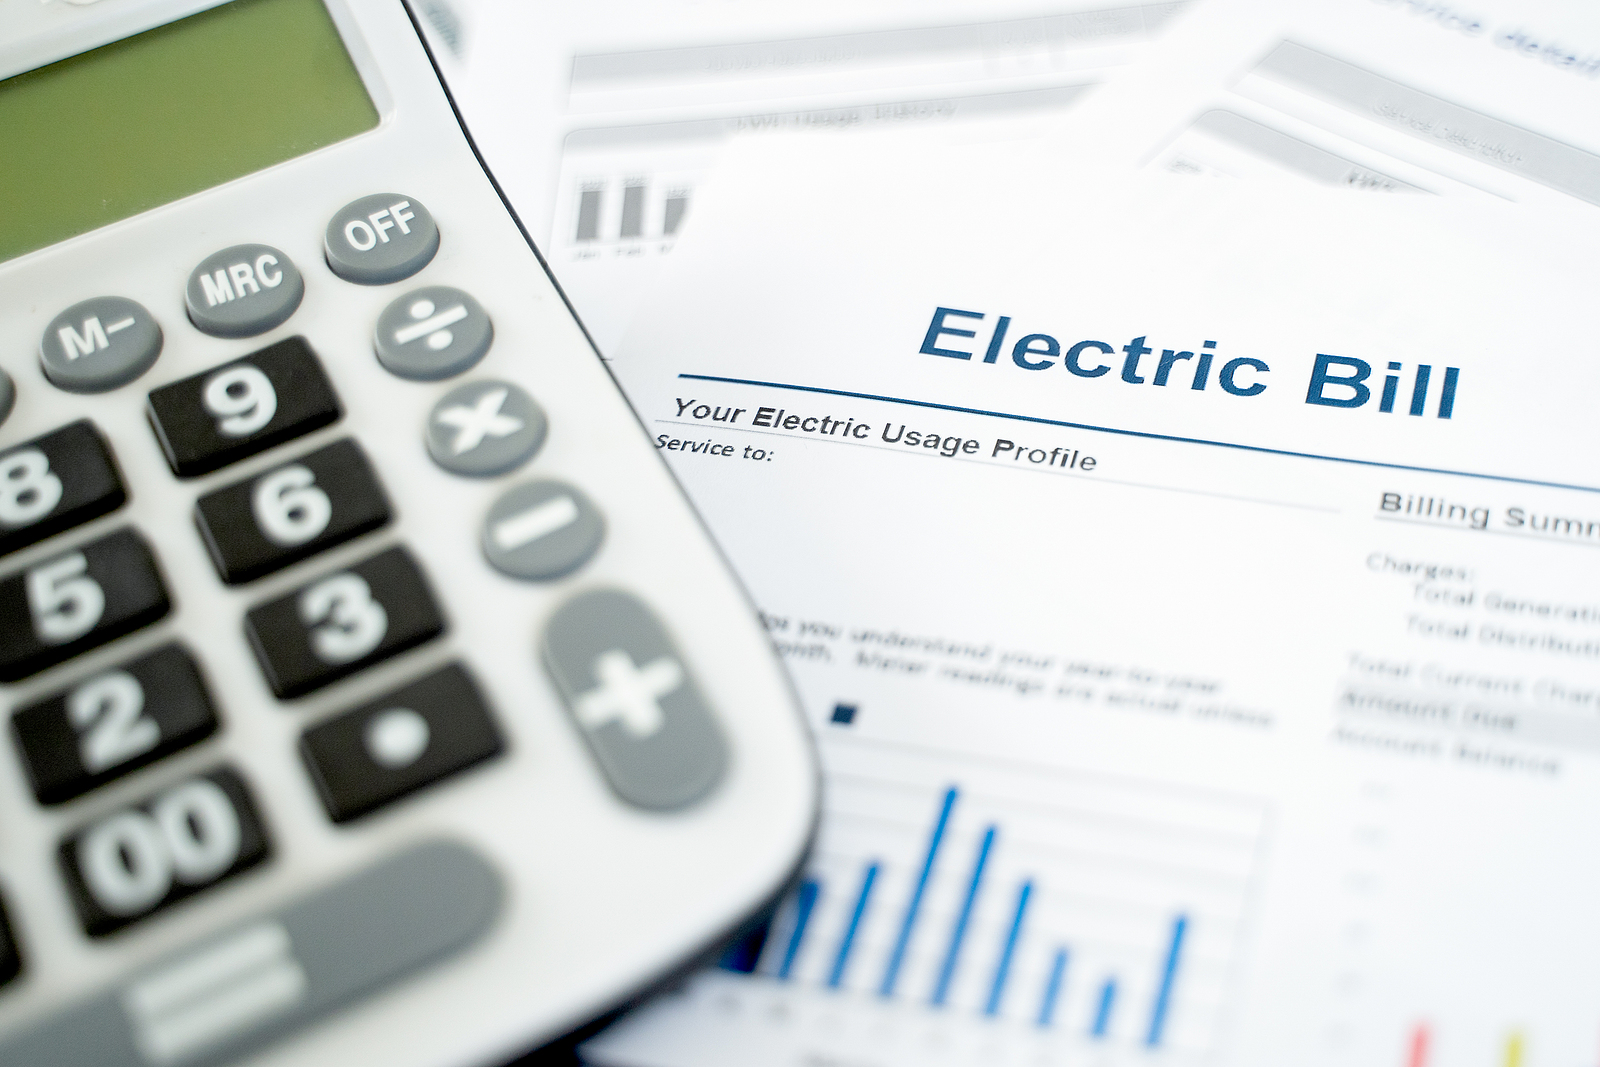 Falling on Hard Times? Get a Loan to Pay Electric Bill